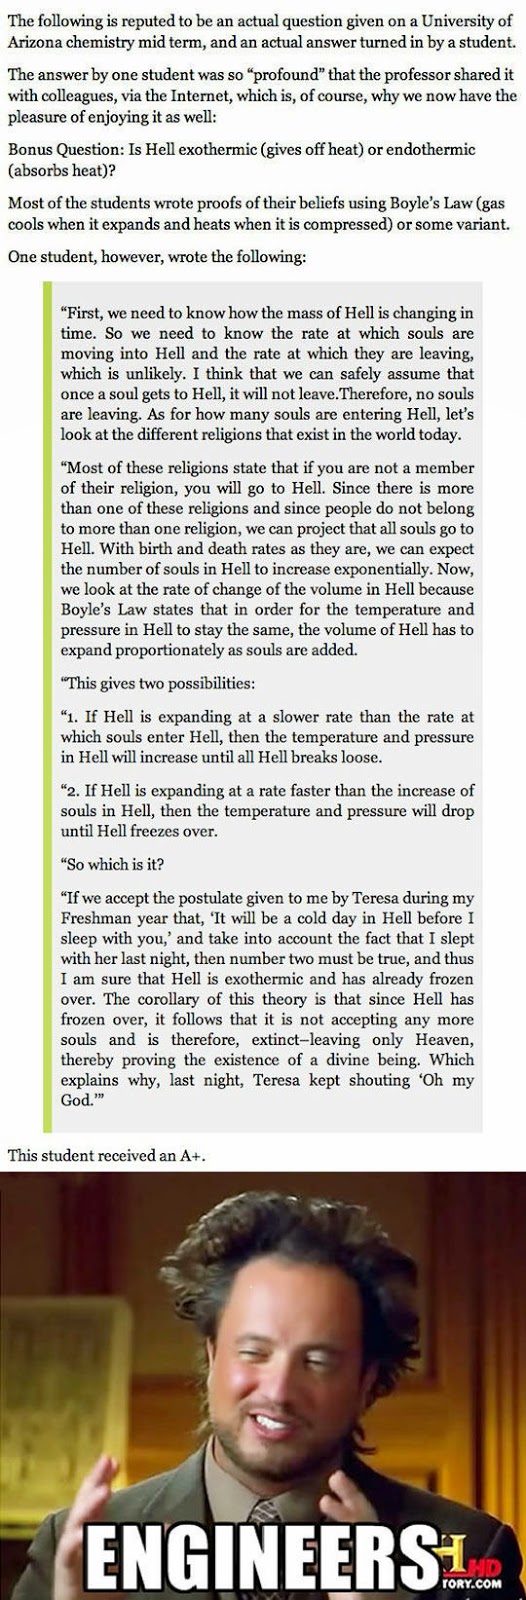 Student Was Asked About “Hell” On An Exam. You Have To Read His Answer!